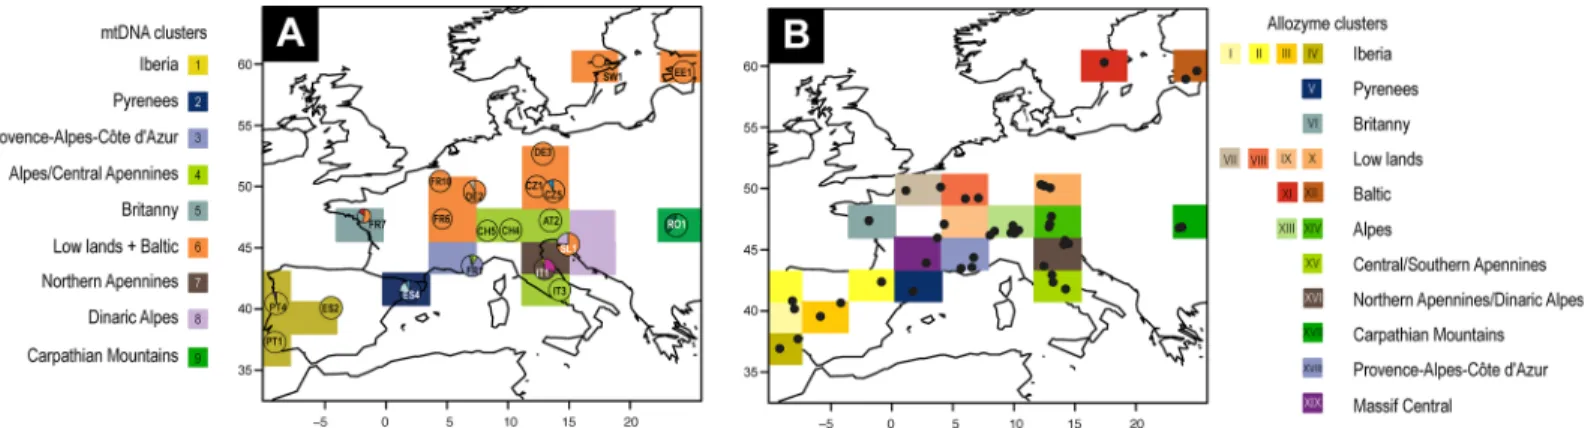 Fig 4. Spatial Bayesian clustering of Euphydryas aurinia . A. Mitochondrial DNA sequences, circles represent both locations and haplotypes found